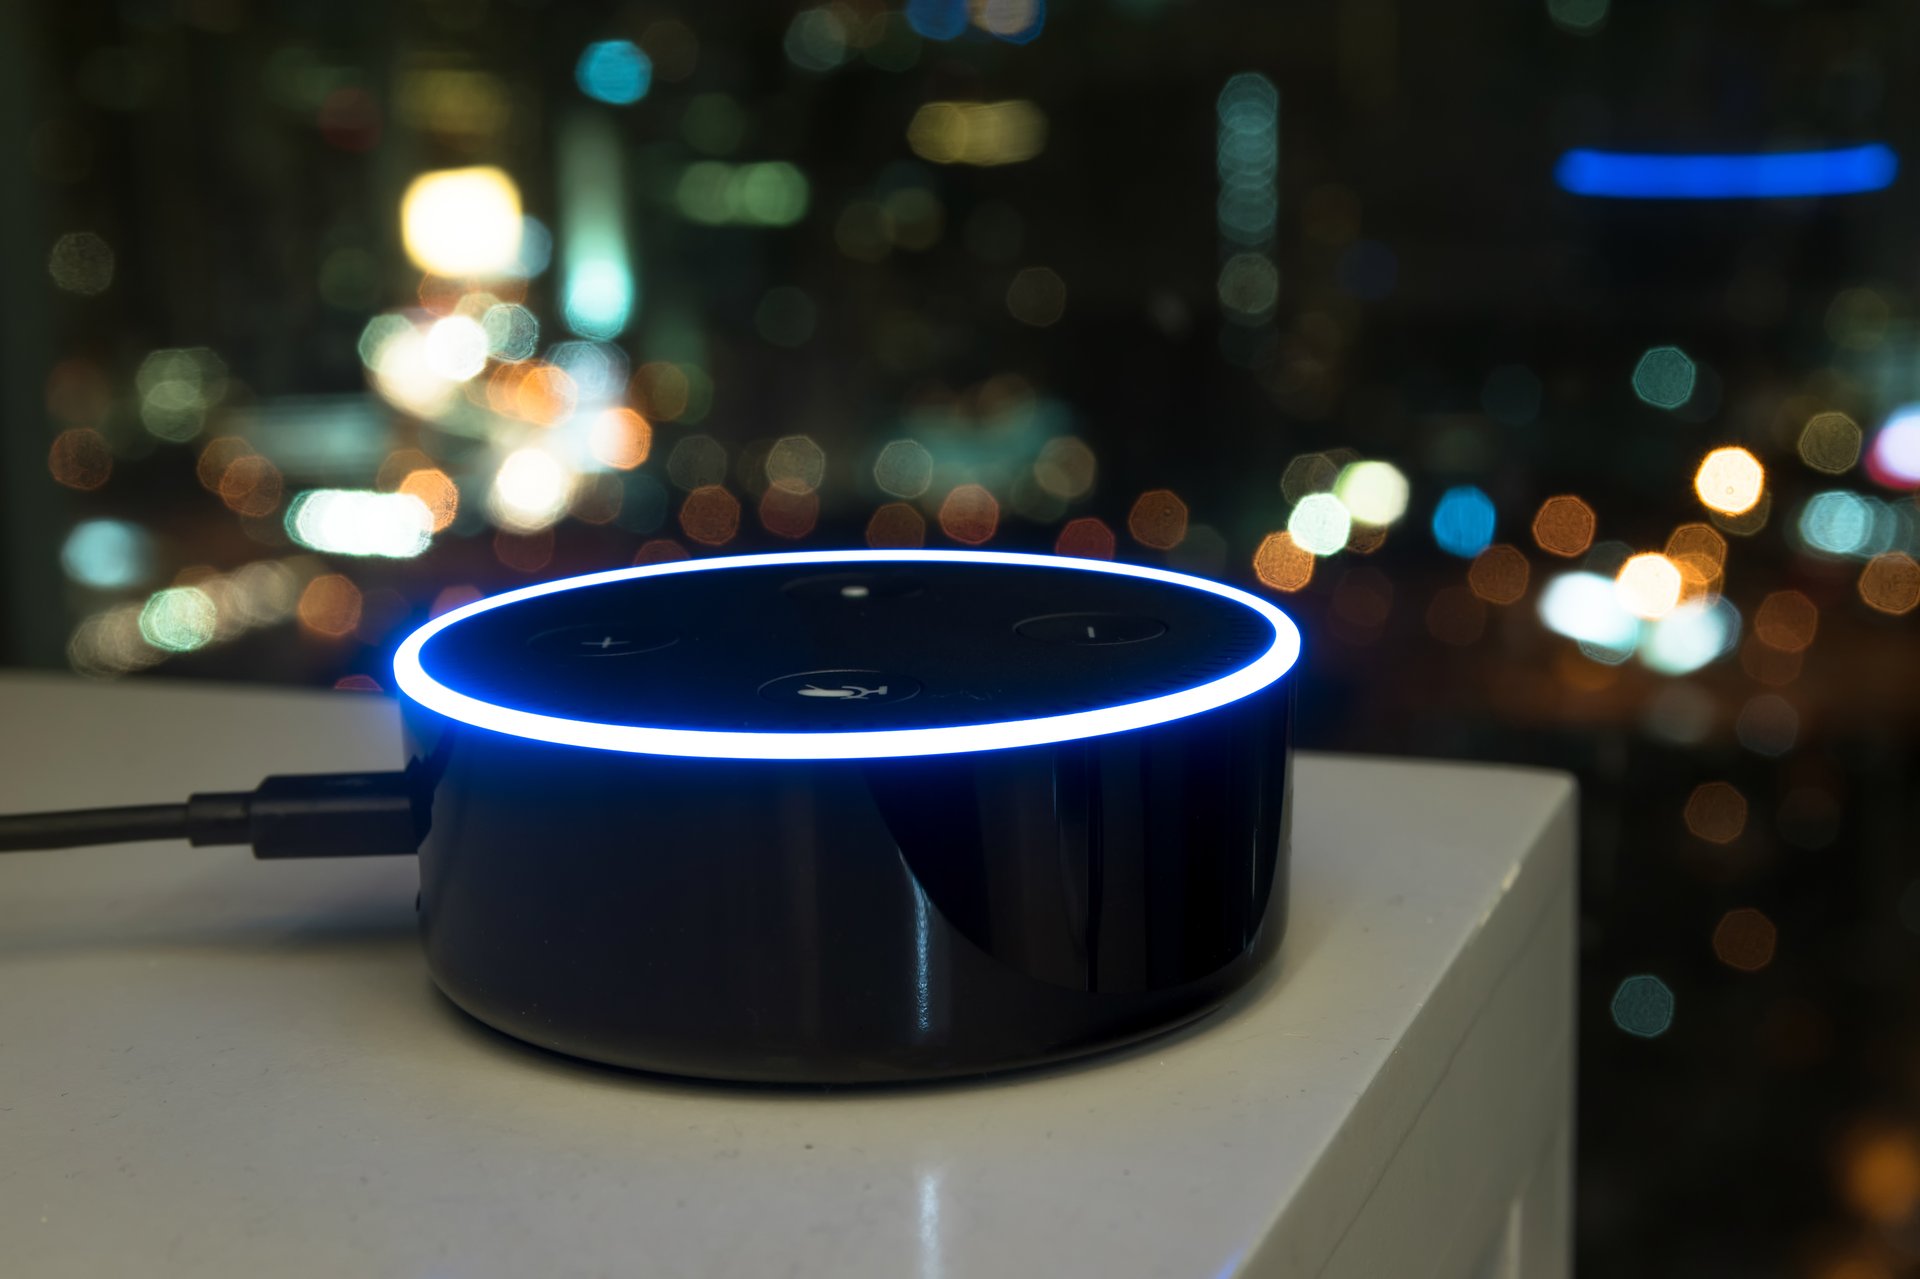 An Echo Dot device by Amazon sits on a table